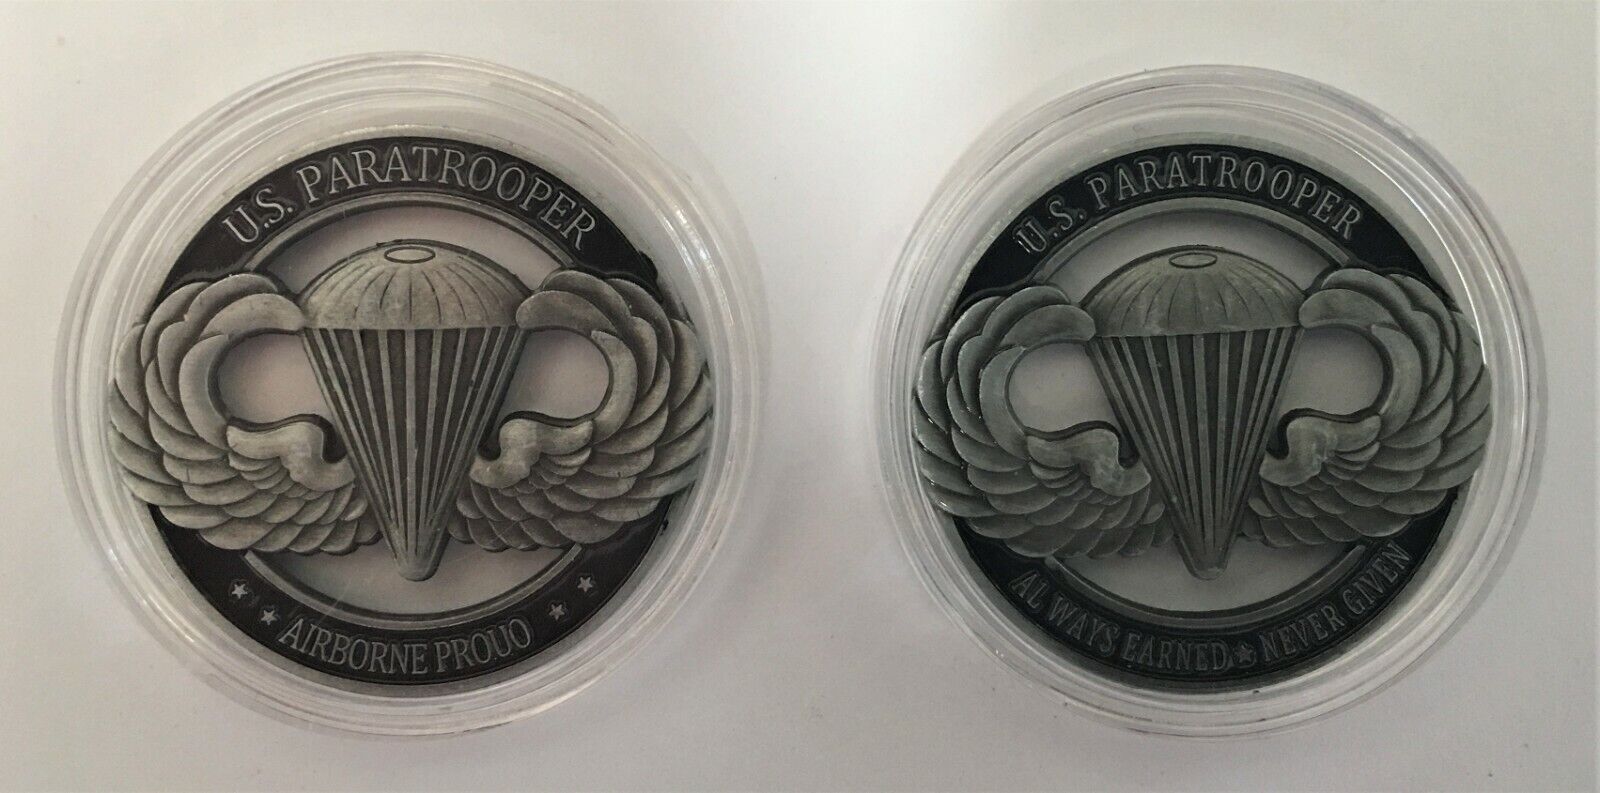 US Paratrooper Airborne Proud Cut Out Challenge Coin Army USMC USAF Ranger SEAL